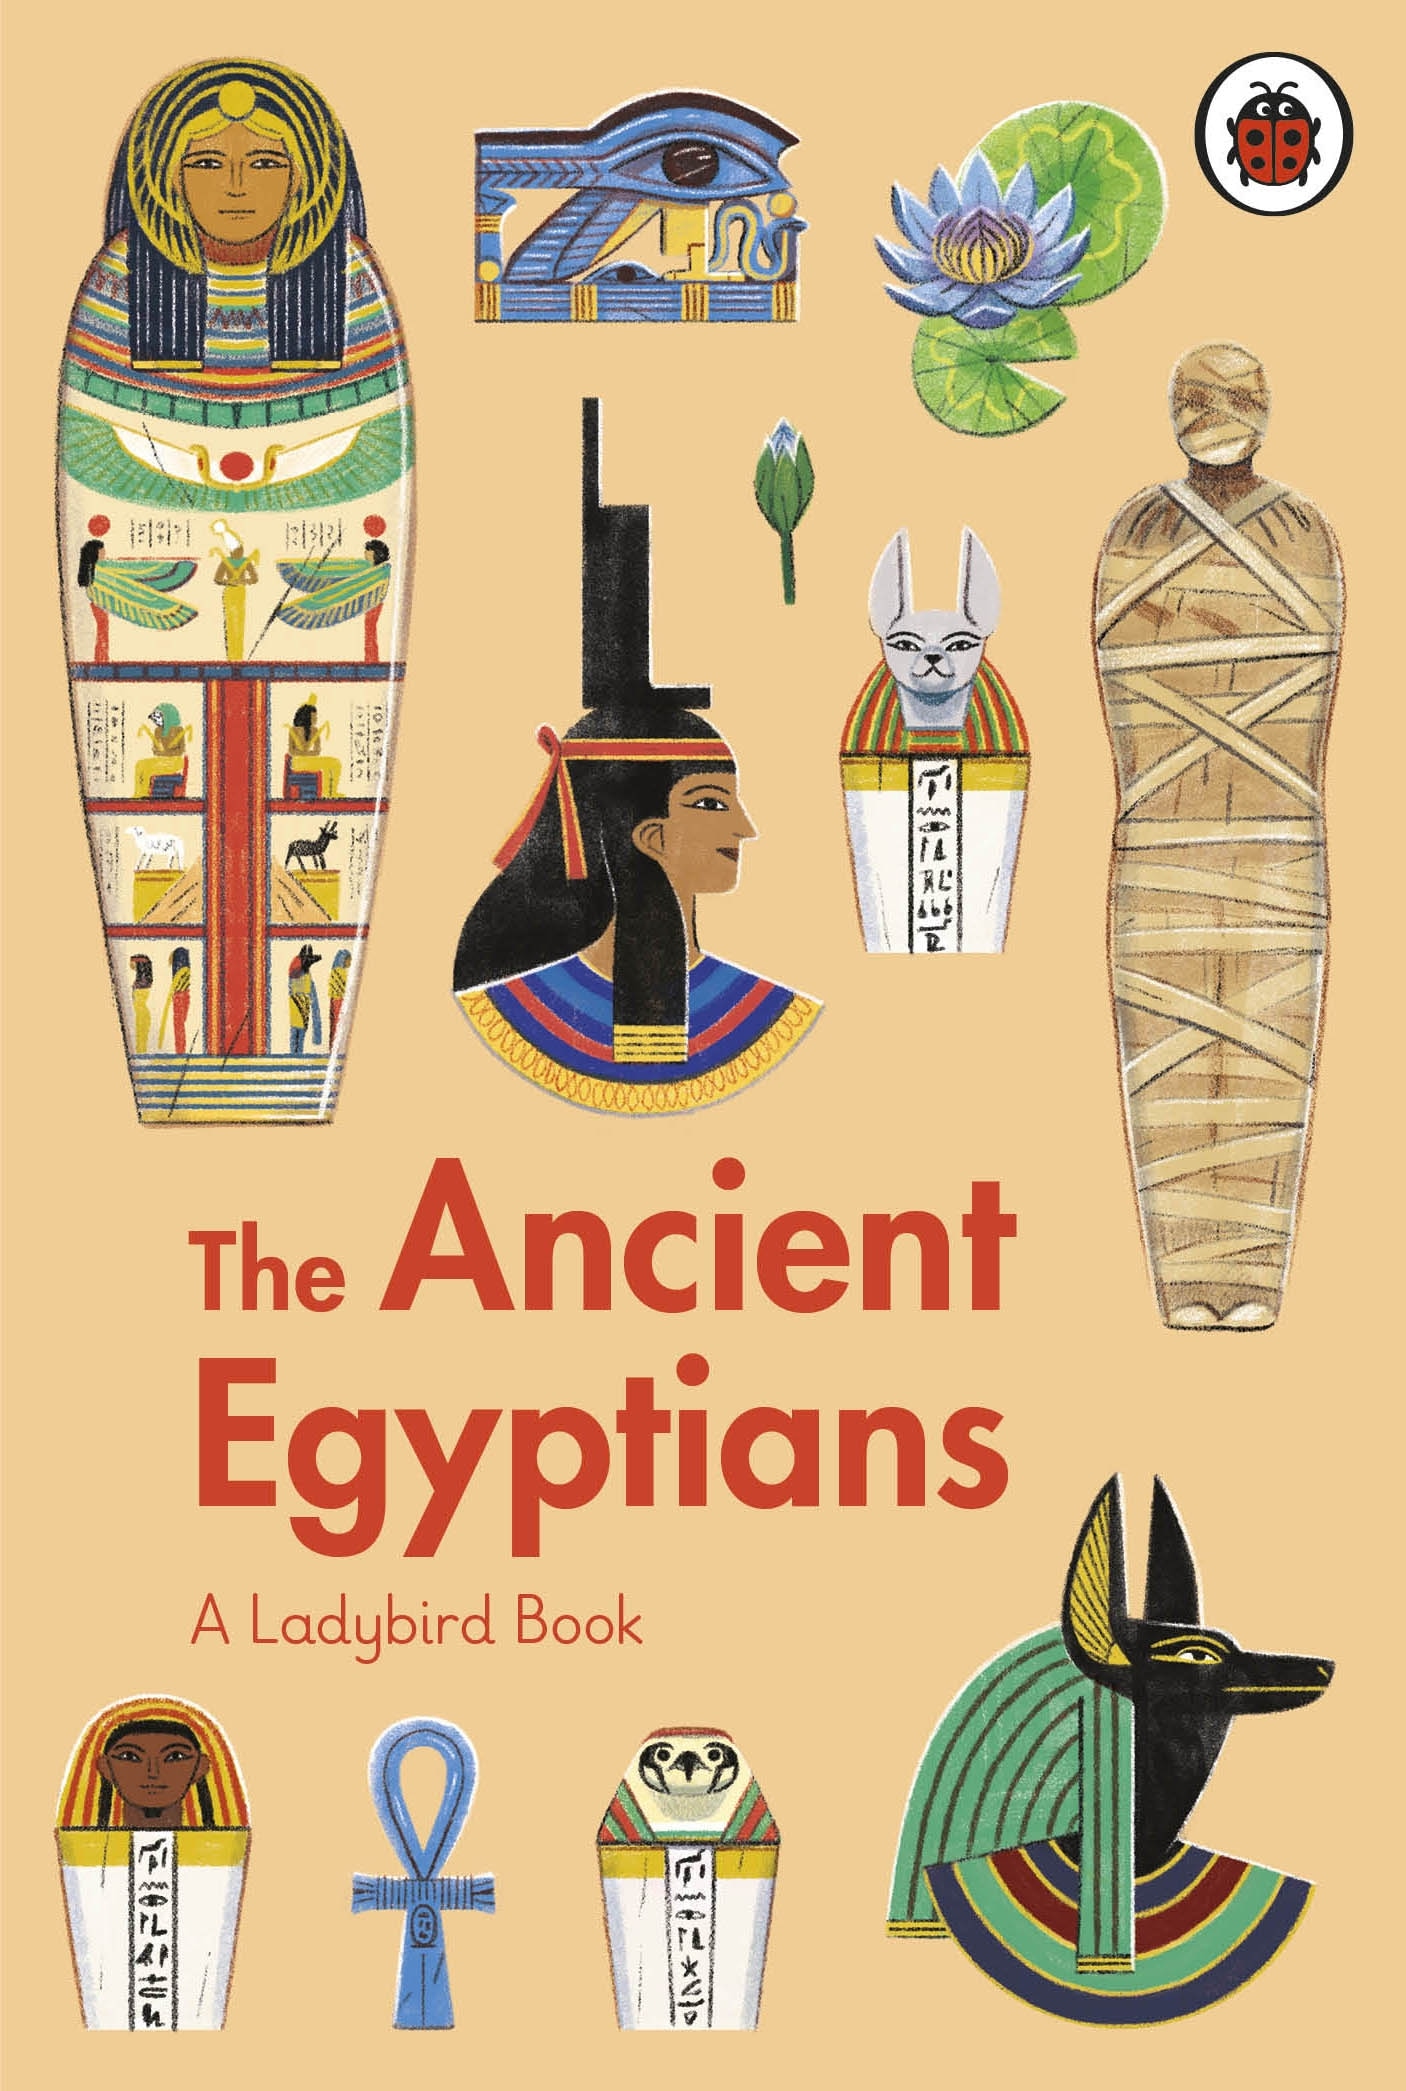 Book “A Ladybird Book: The Ancient Egyptians” by Sidra Ansari — August 4, 2022